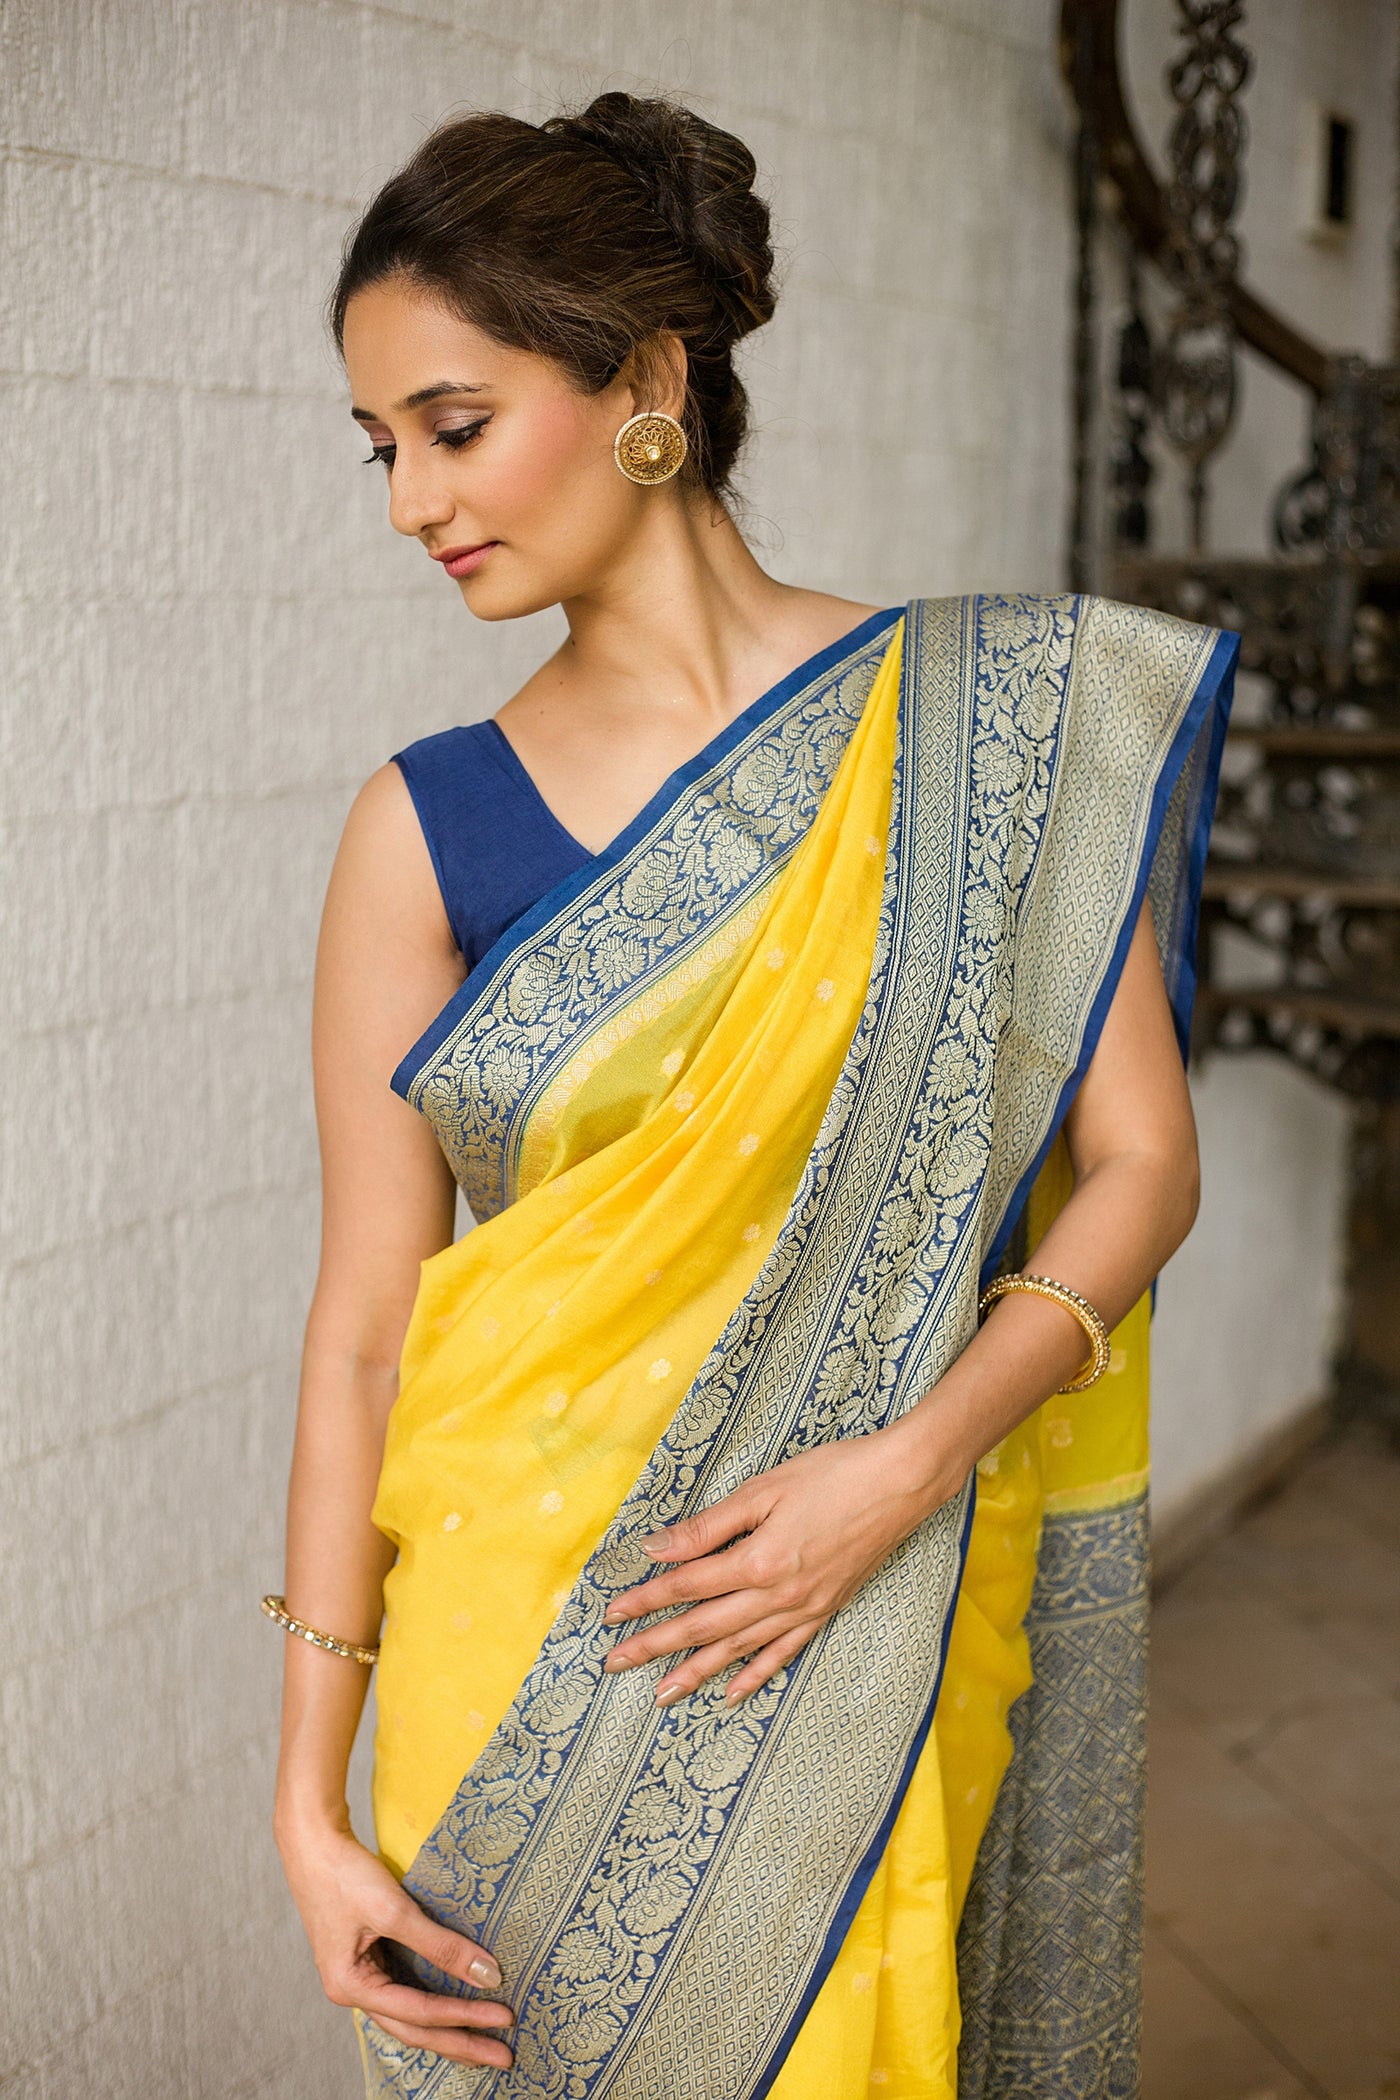 Yellow Self Woven Saree Indian Clothing in Denver, CO, Aurora, CO, Boulder, CO, Fort Collins, CO, Colorado Springs, CO, Parker, CO, Highlands Ranch, CO, Cherry Creek, CO, Centennial, CO, and Longmont, CO. NATIONWIDE SHIPPING USA- India Fashion X